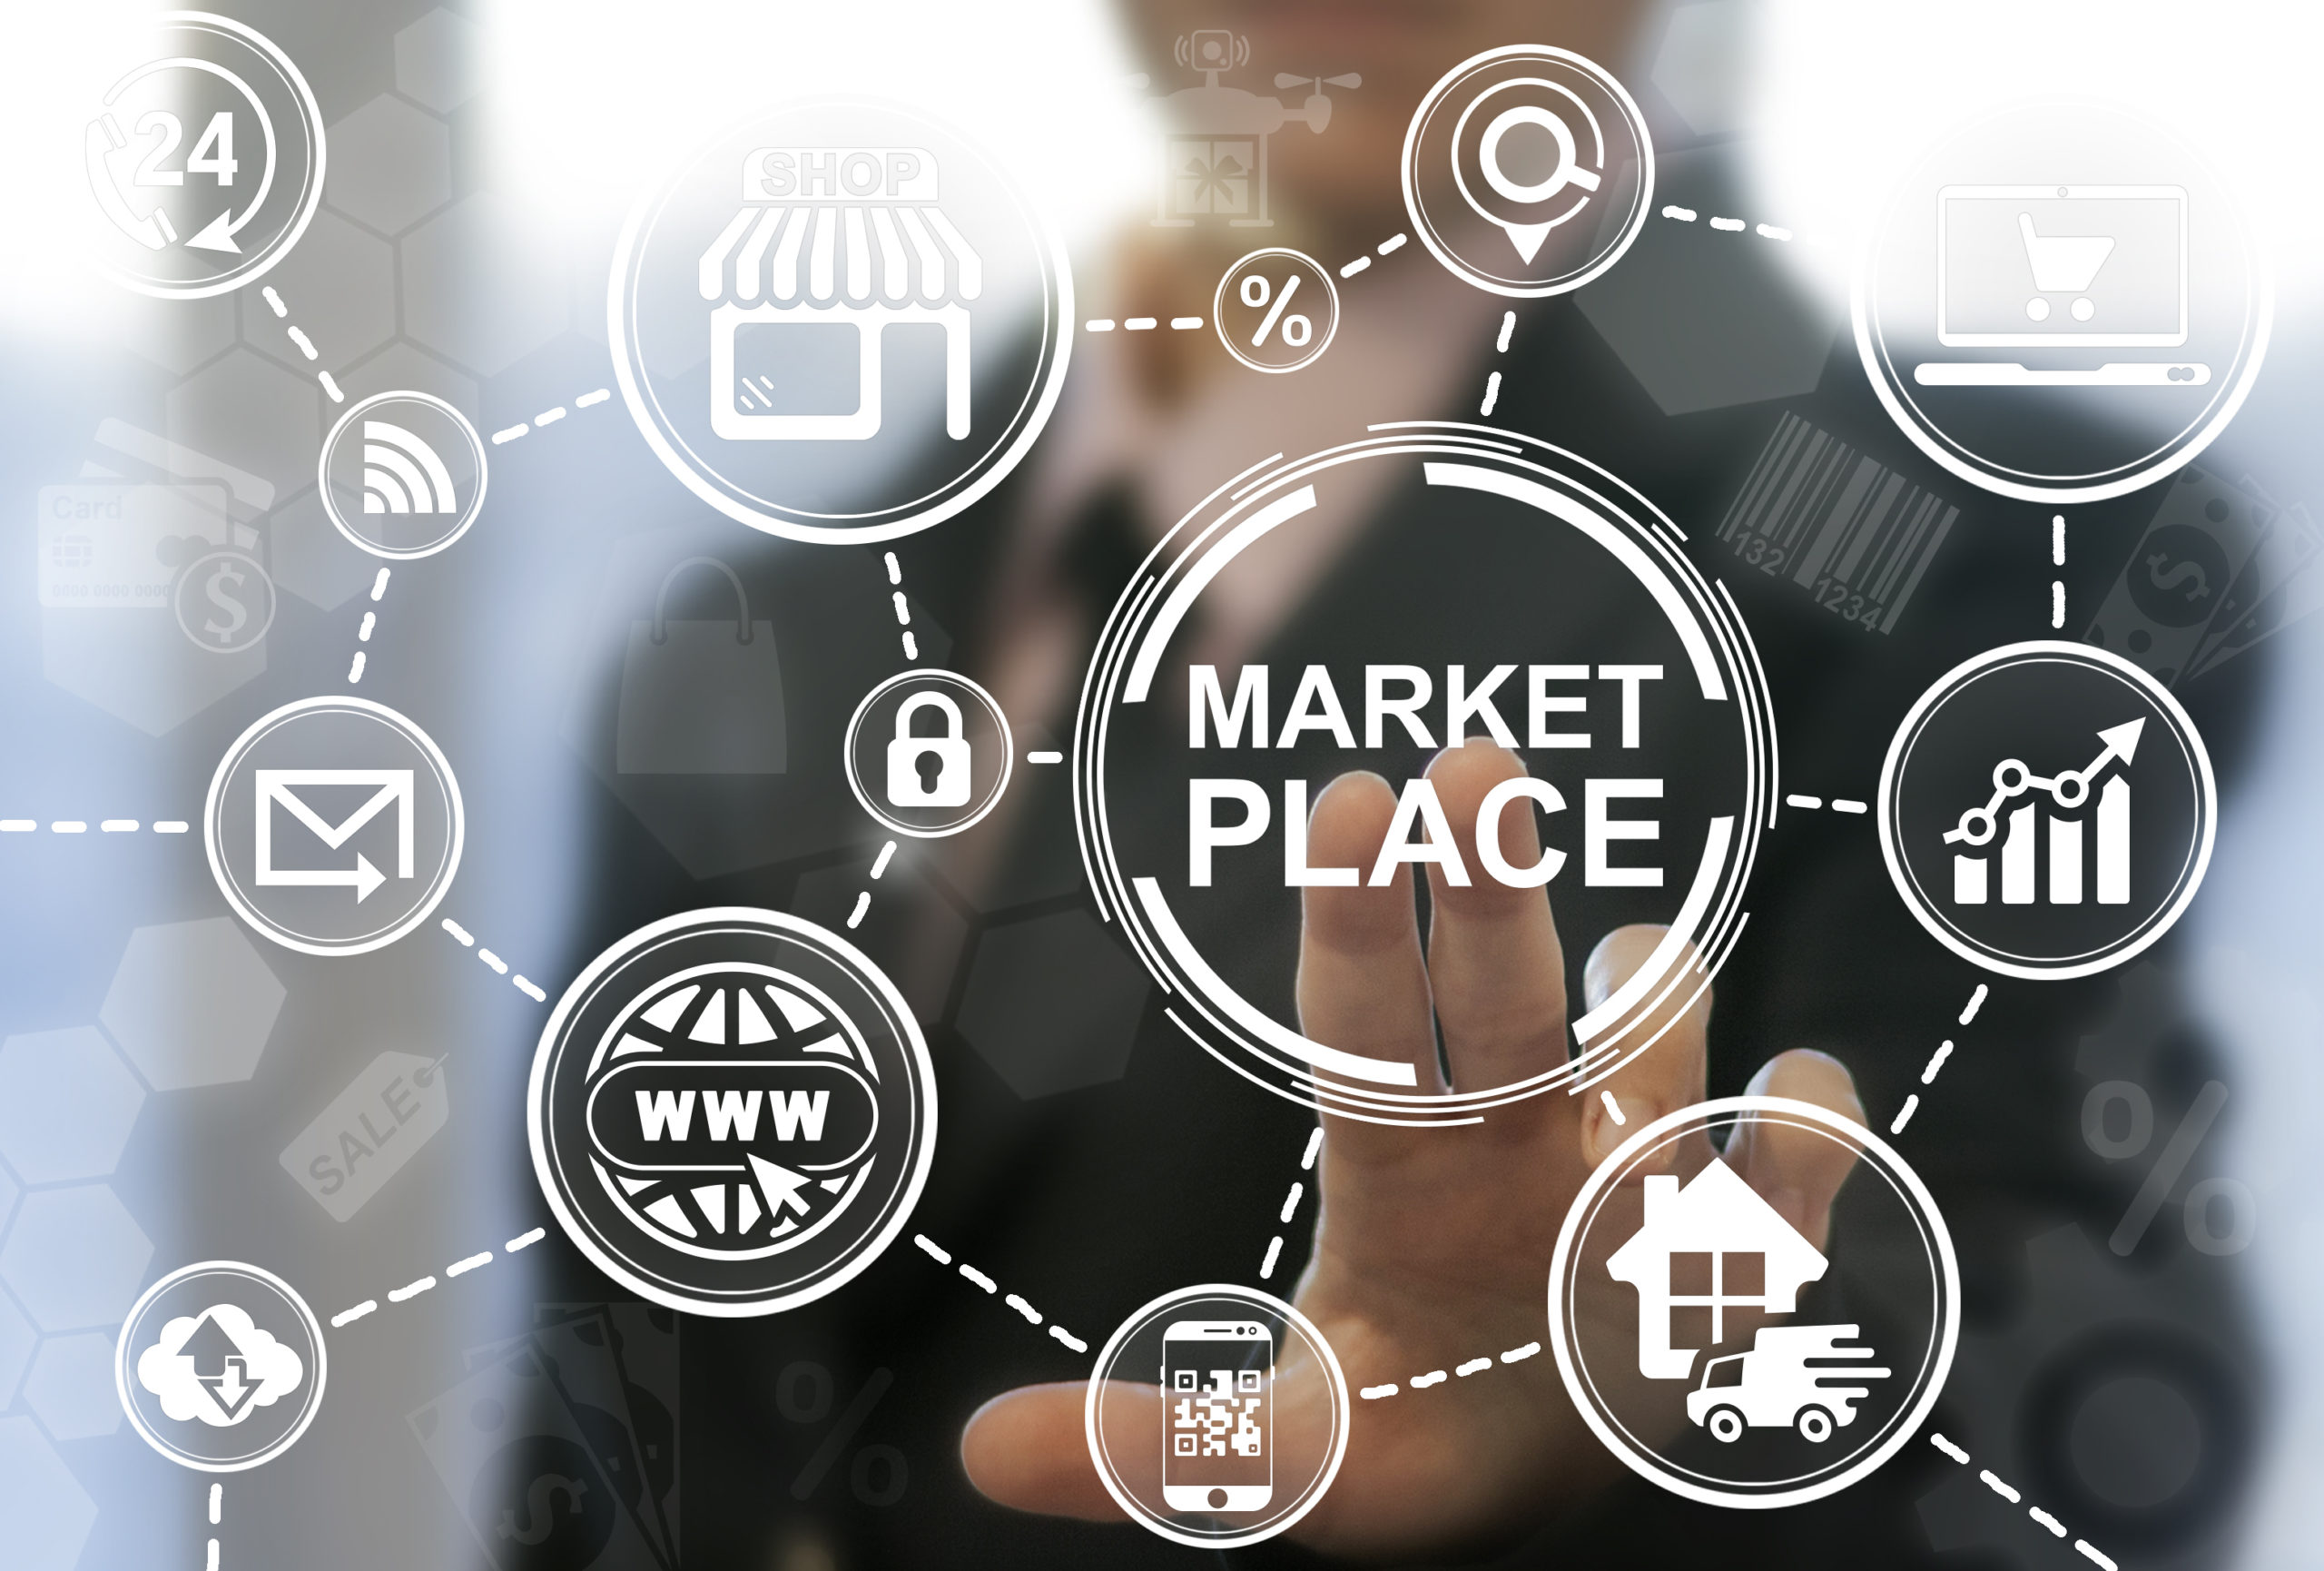 Online Marketplace Latest Technology Trends in 2020